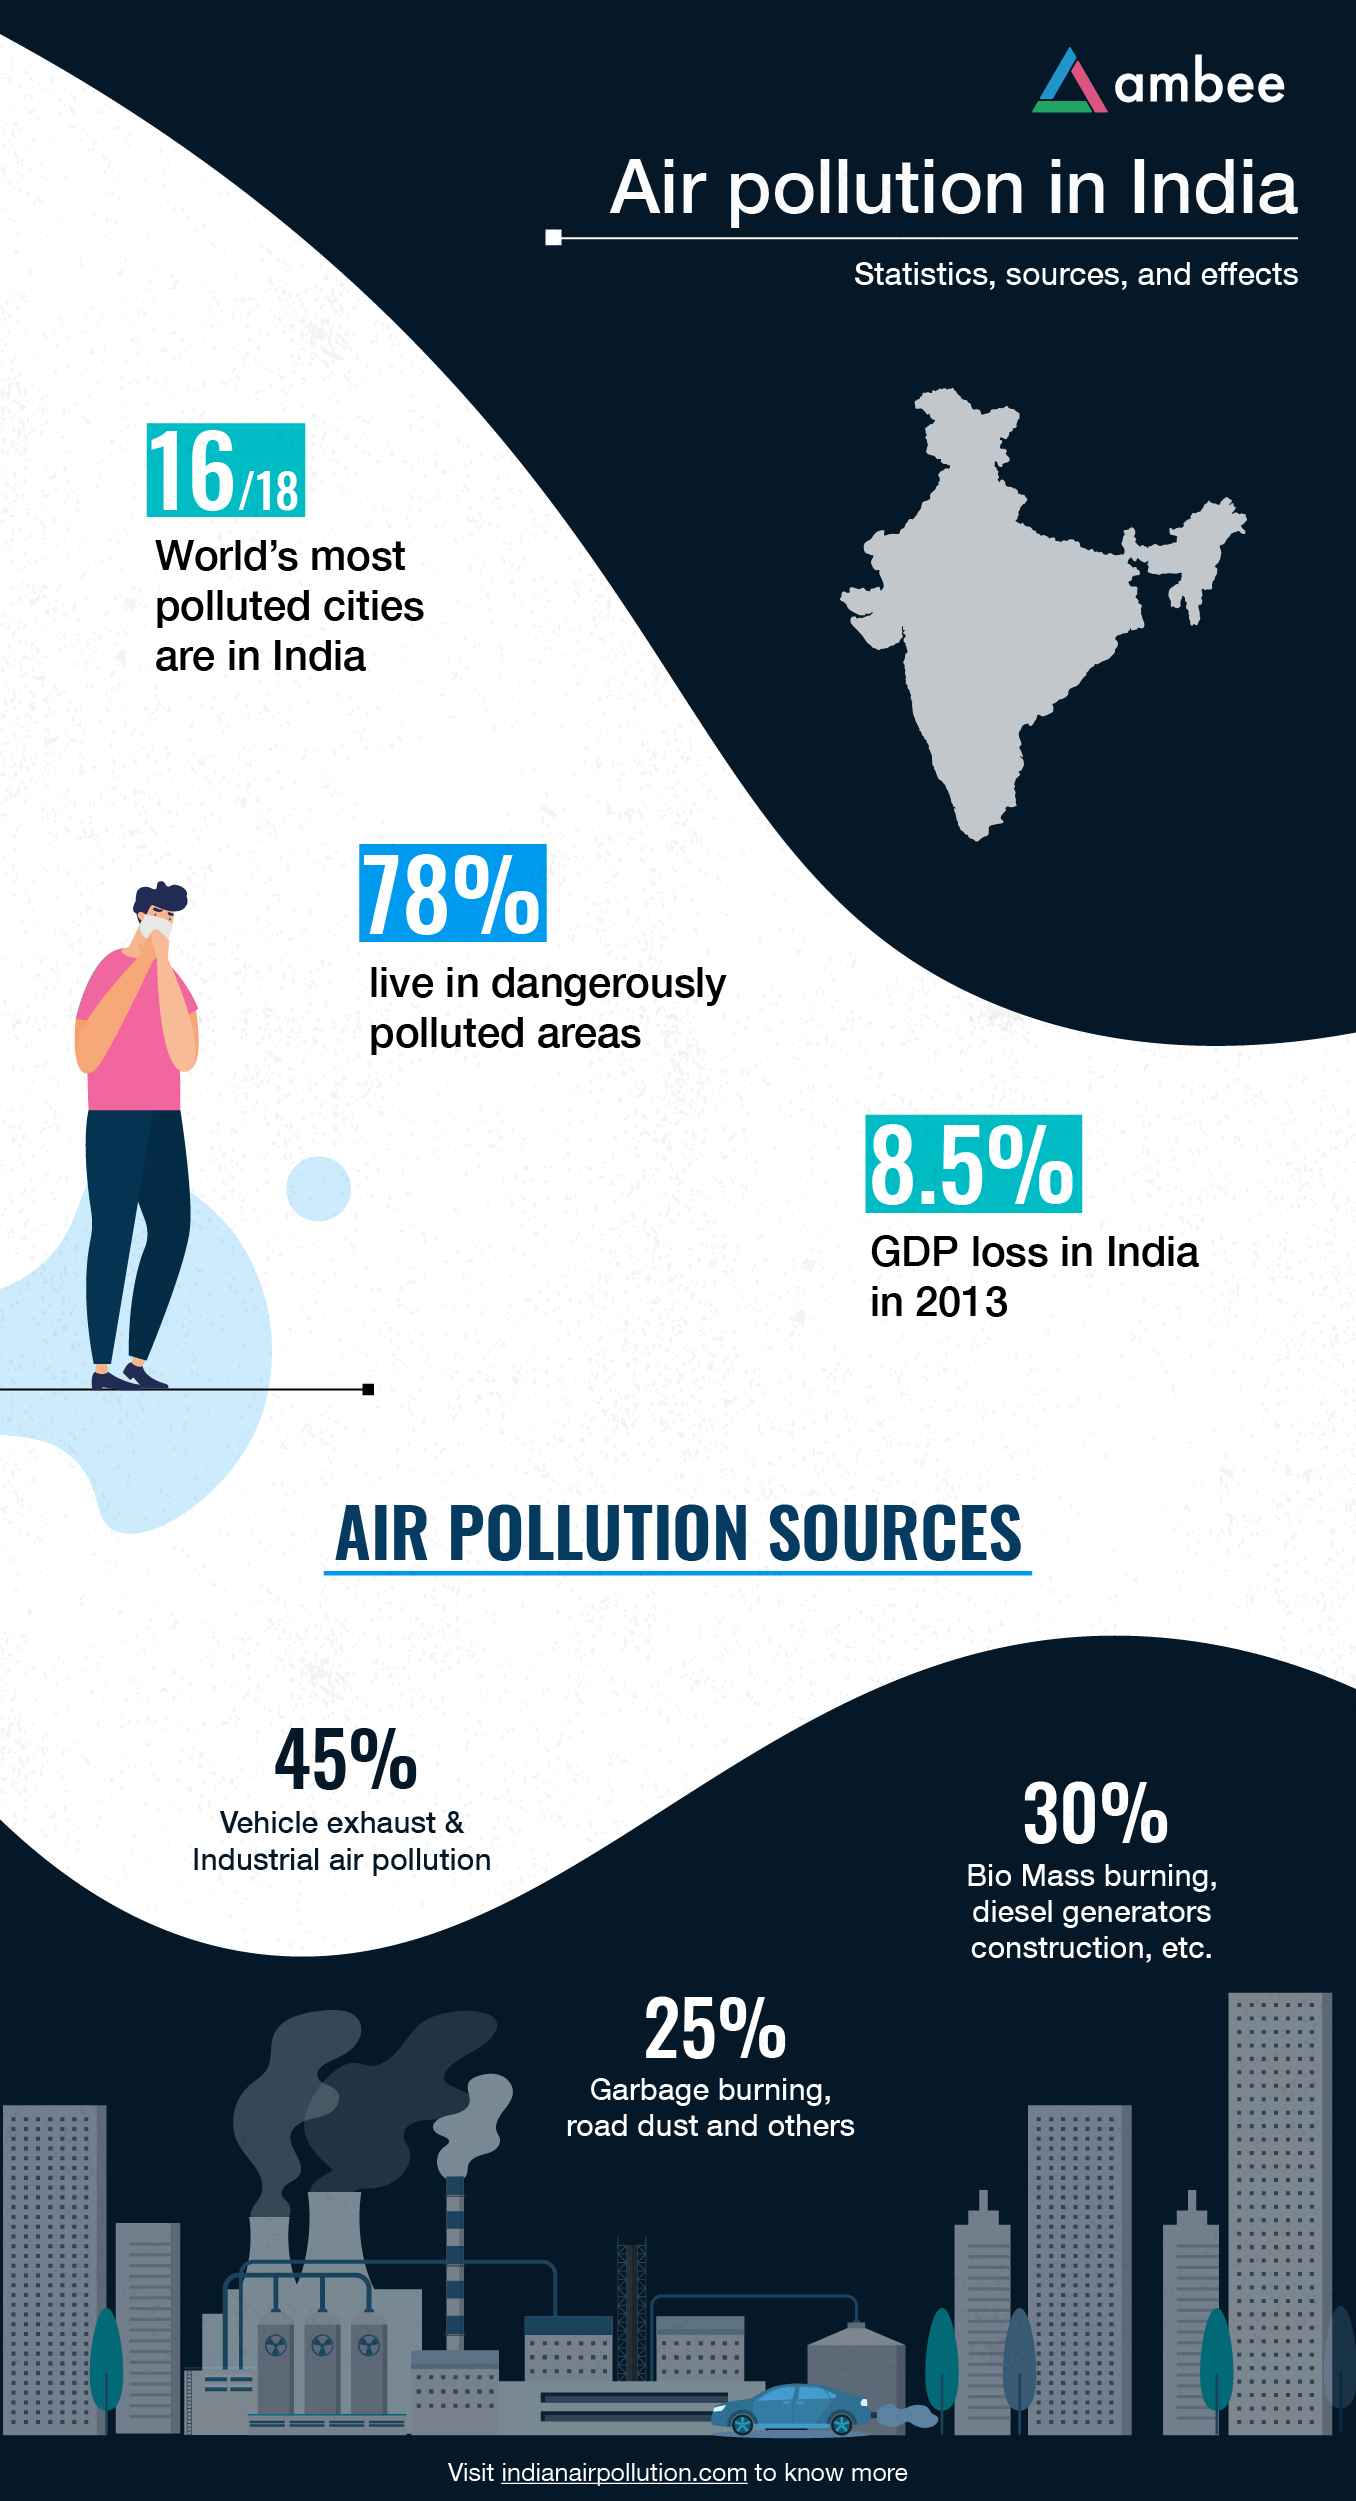 Ambee’s Multimodal Approach Combats Air Pollution With Actionable Data